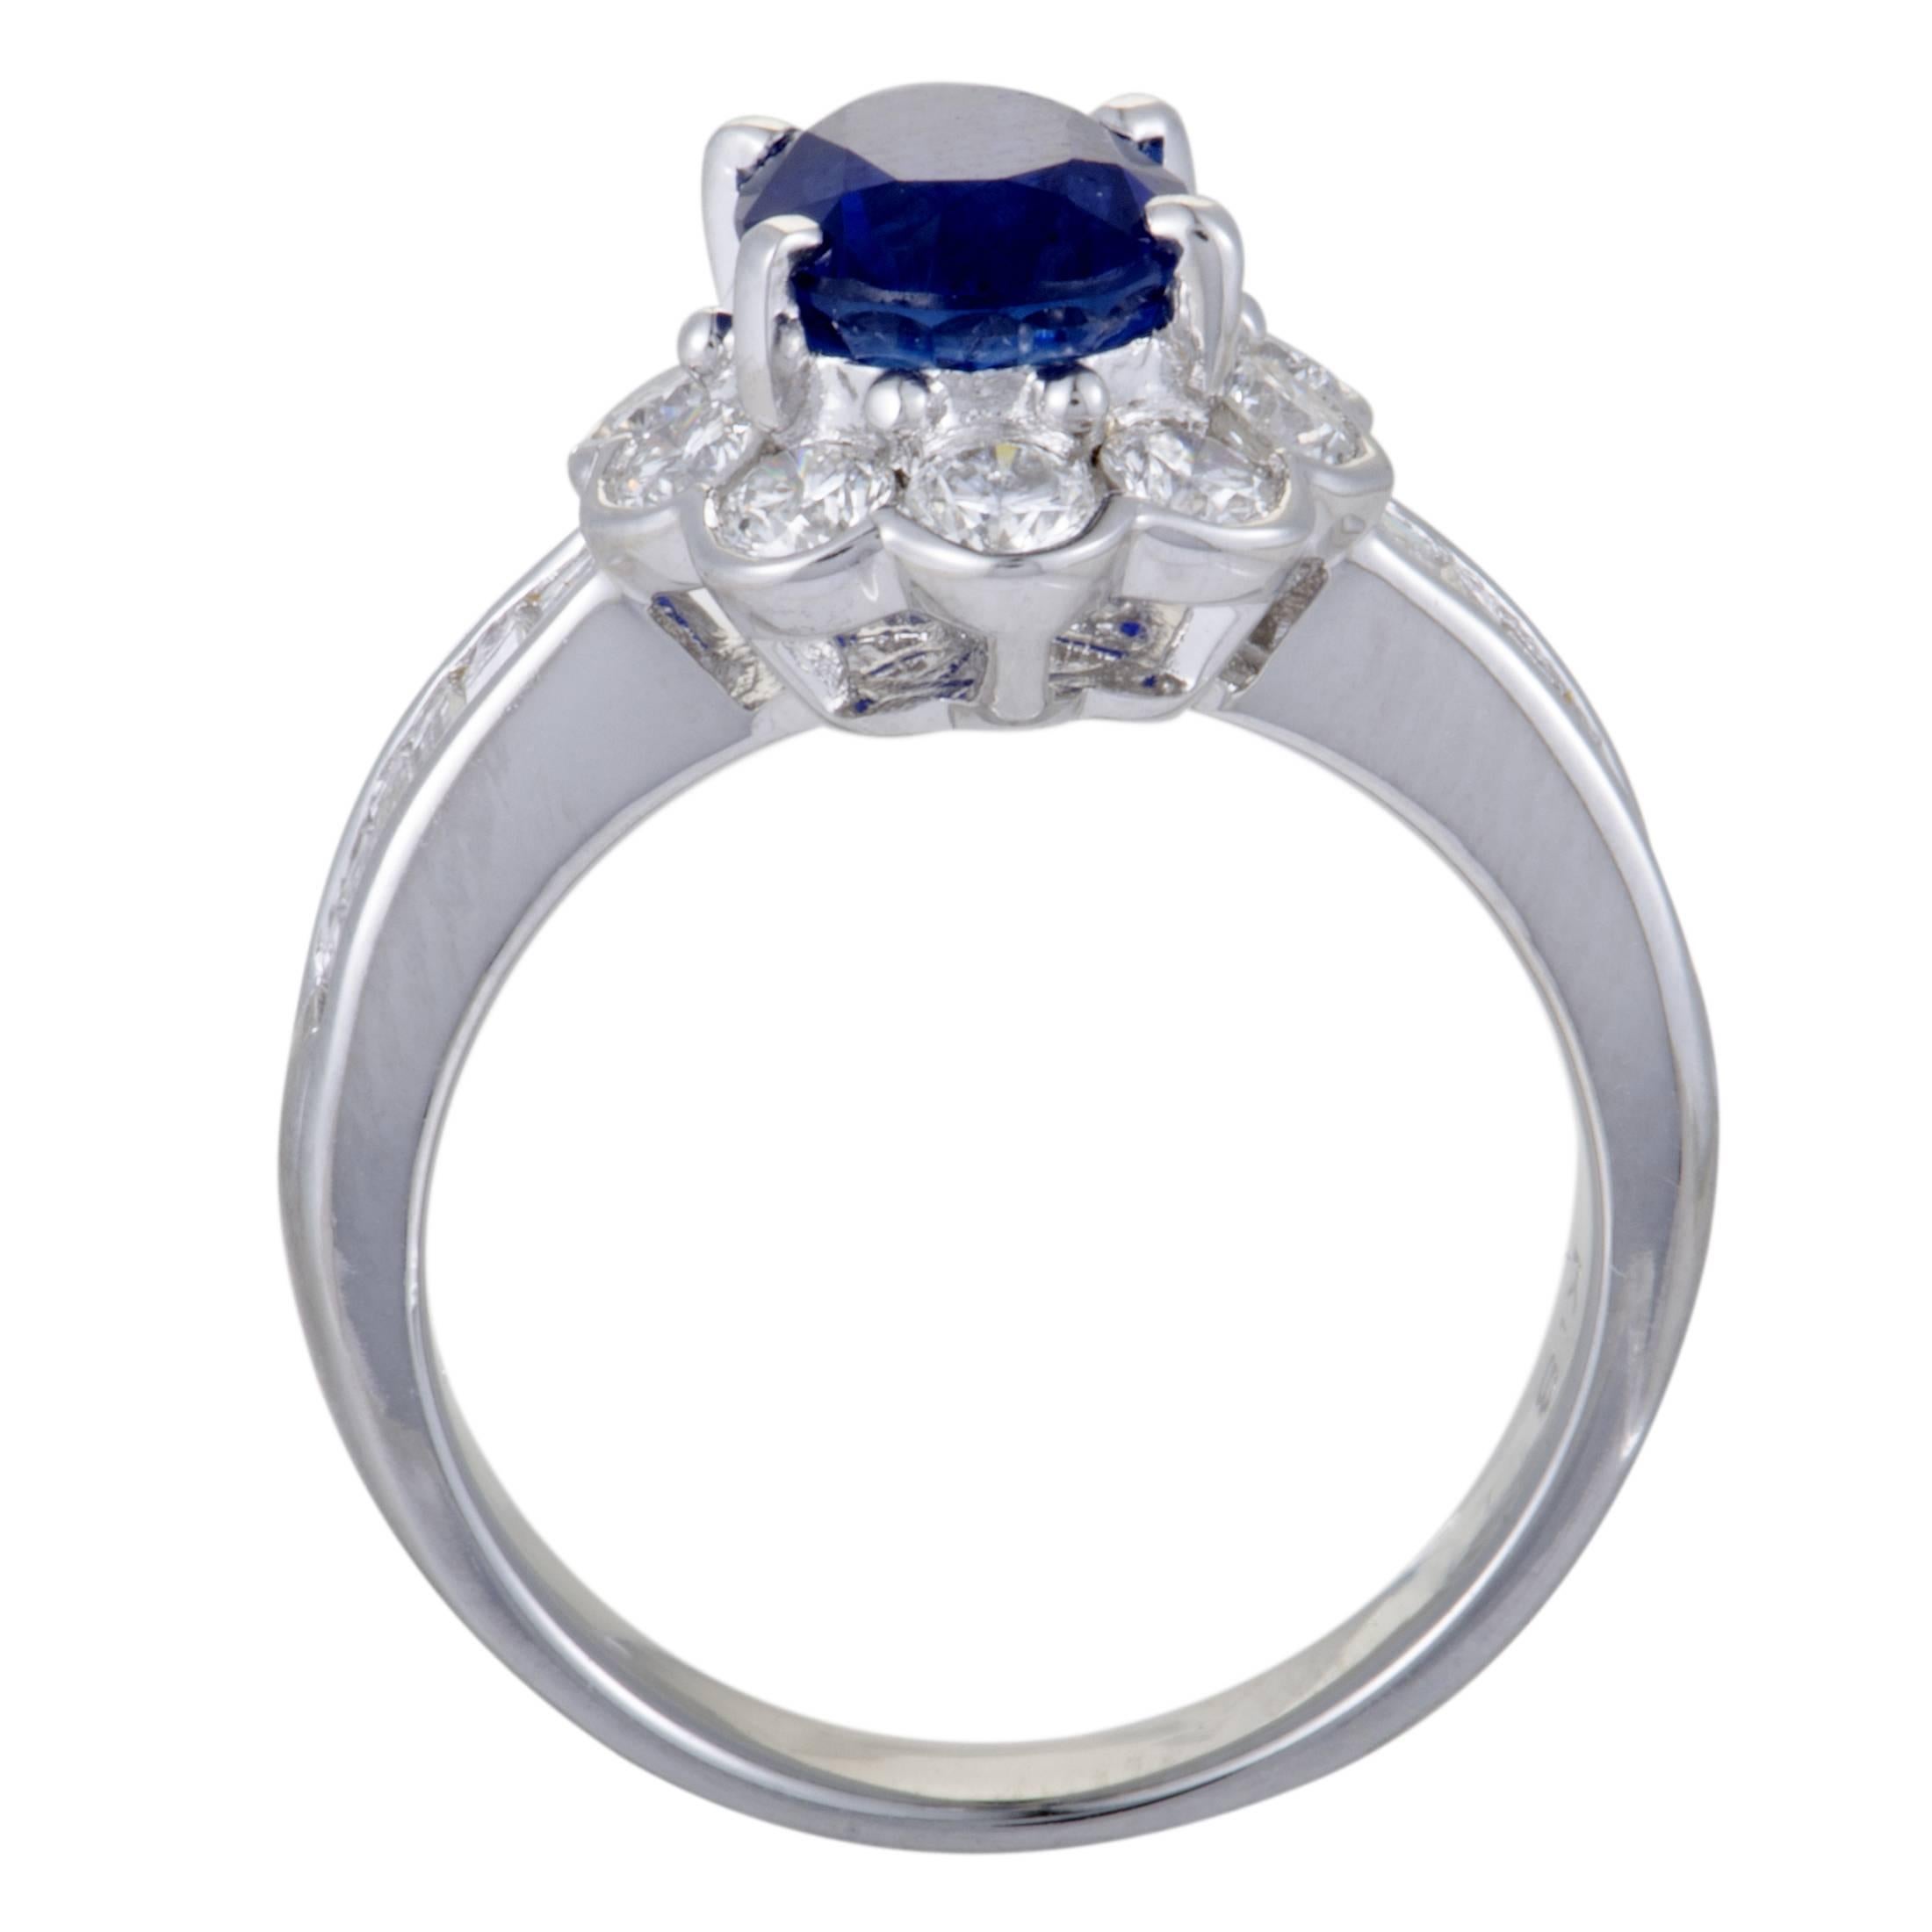 Gorgeously designed and exquisitely crafted from 18K white gold, this ring is given an attractive, prestigious appearance by the sumptuous combination of resplendent diamonds and a regal ceylon sapphire. The sapphire weighs 2.47 carats, and the